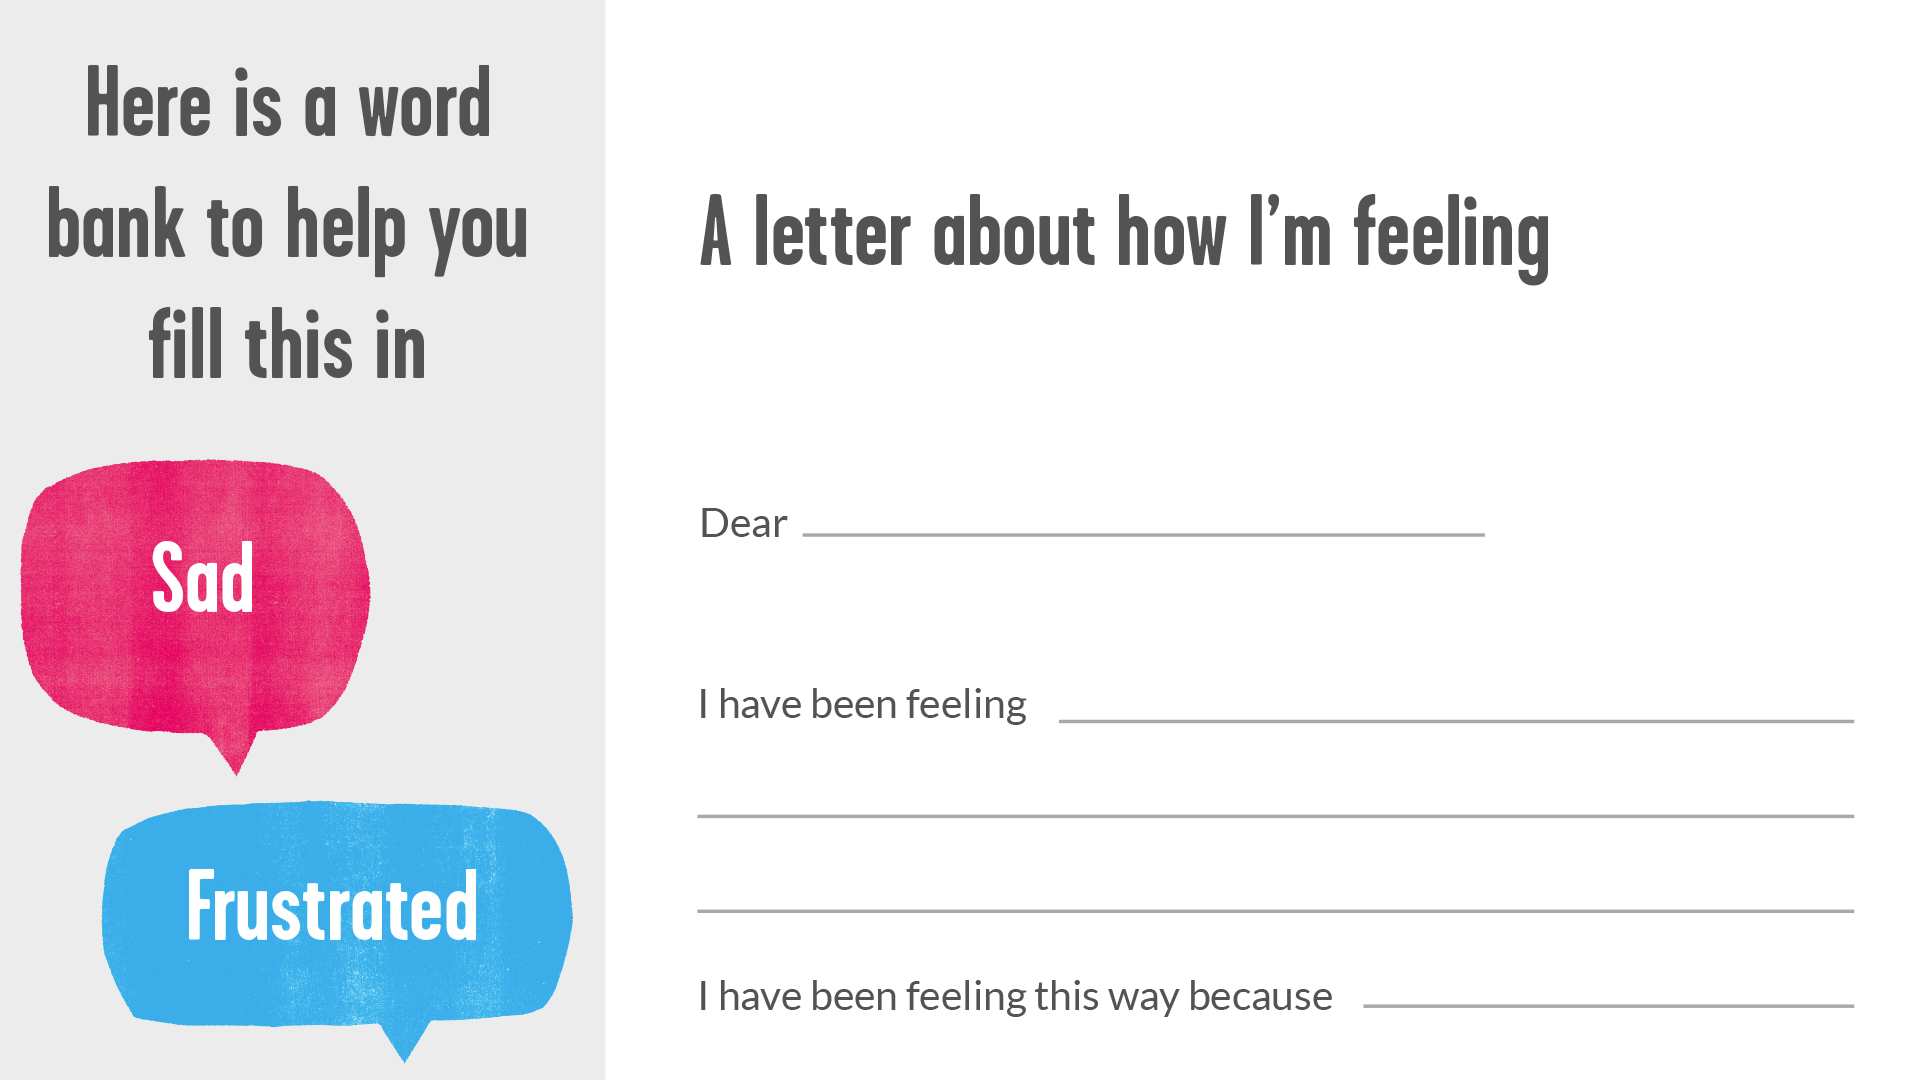 An image of our 'A letter about how I'm feeling' template which has space to share your feelings.